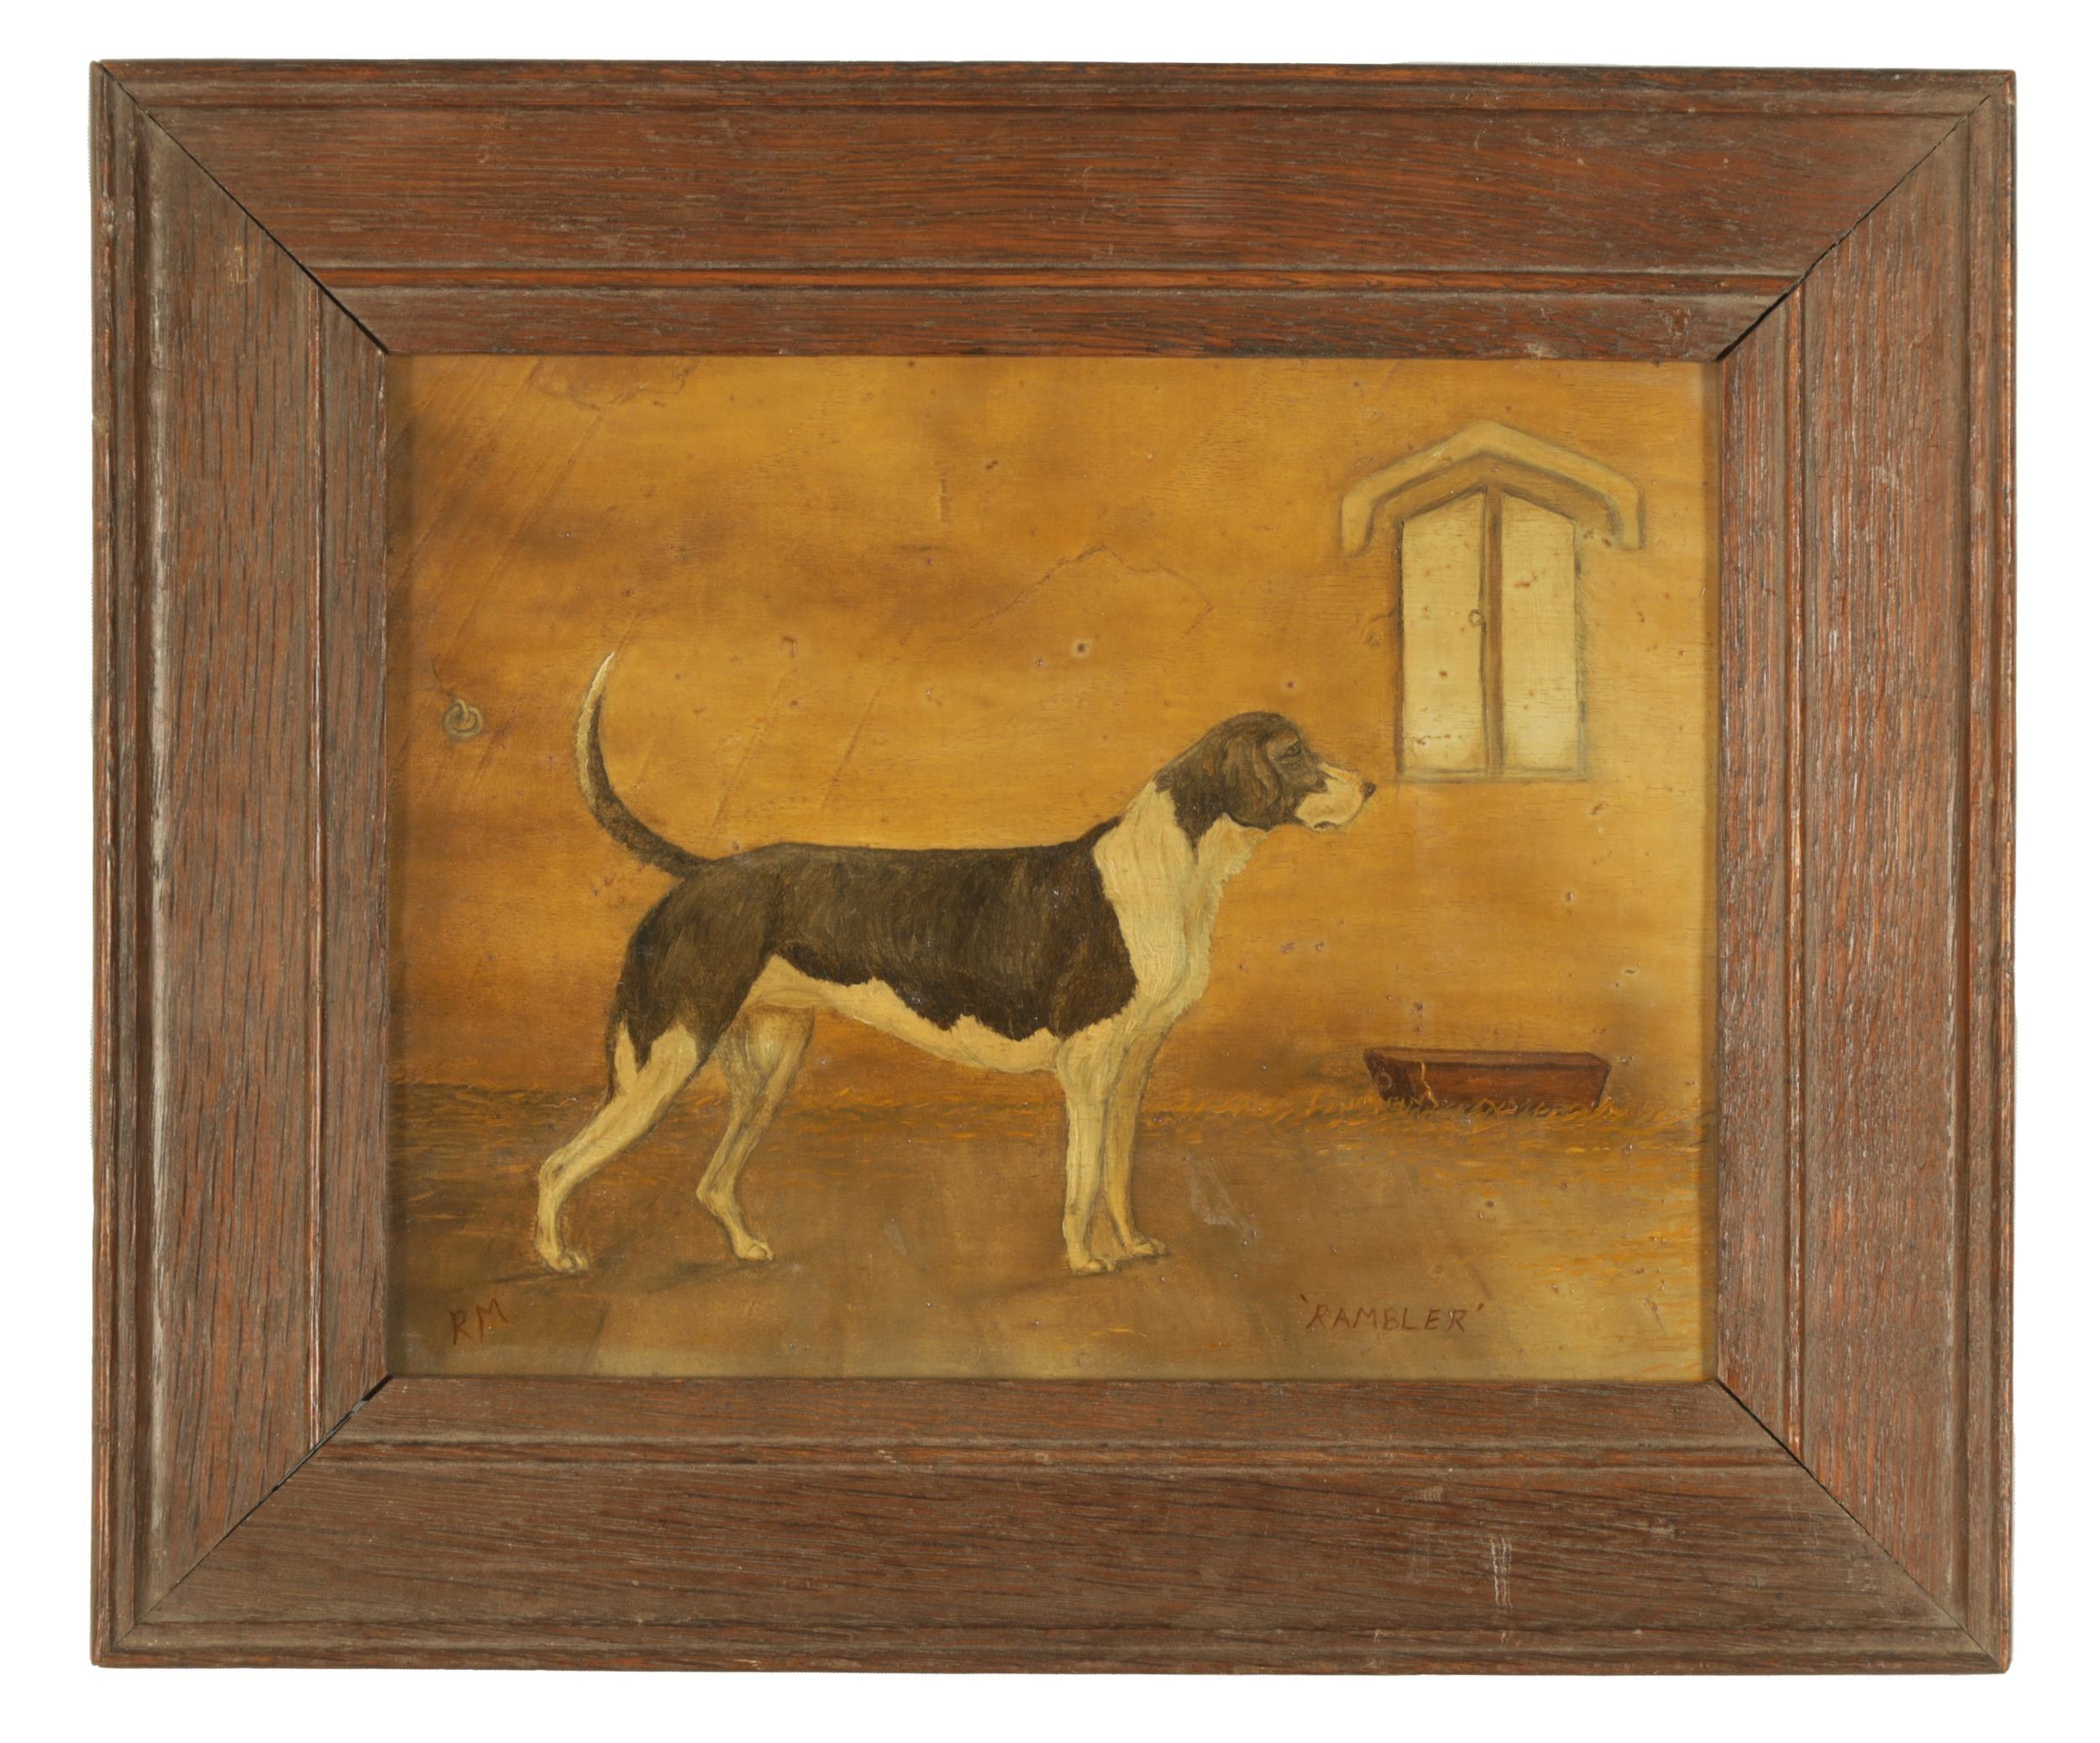 Antique English Primitive Dog Oil Painting - Hound in a Stable Interior, signed